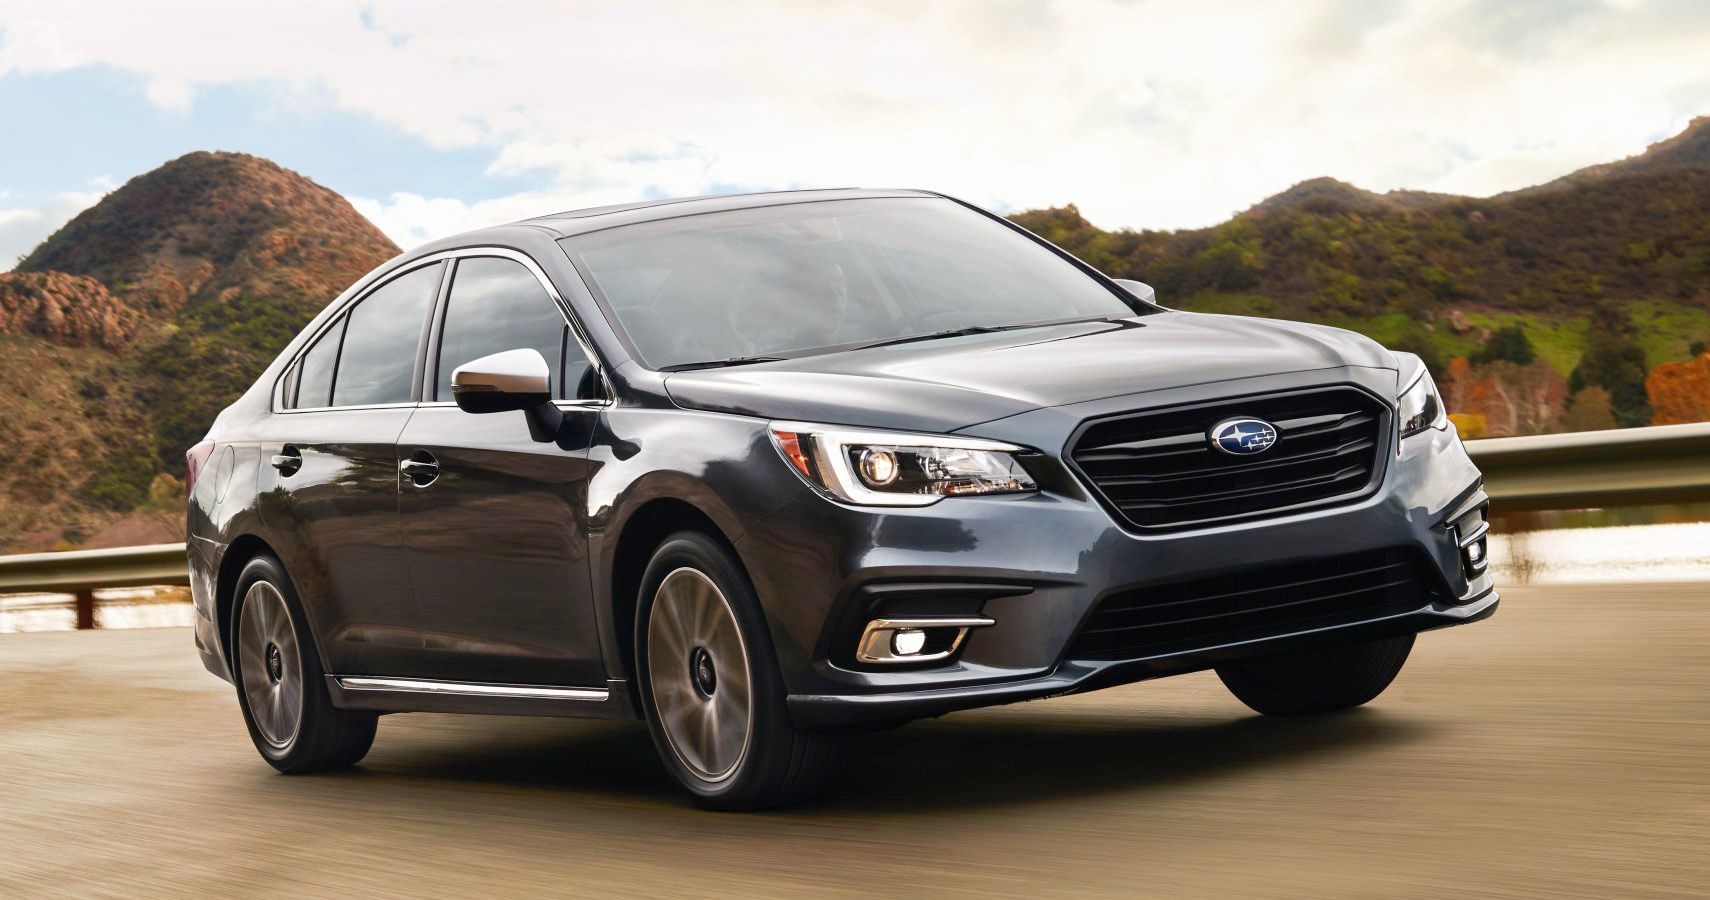 2020 Subaru Legacy Spotted With New Look